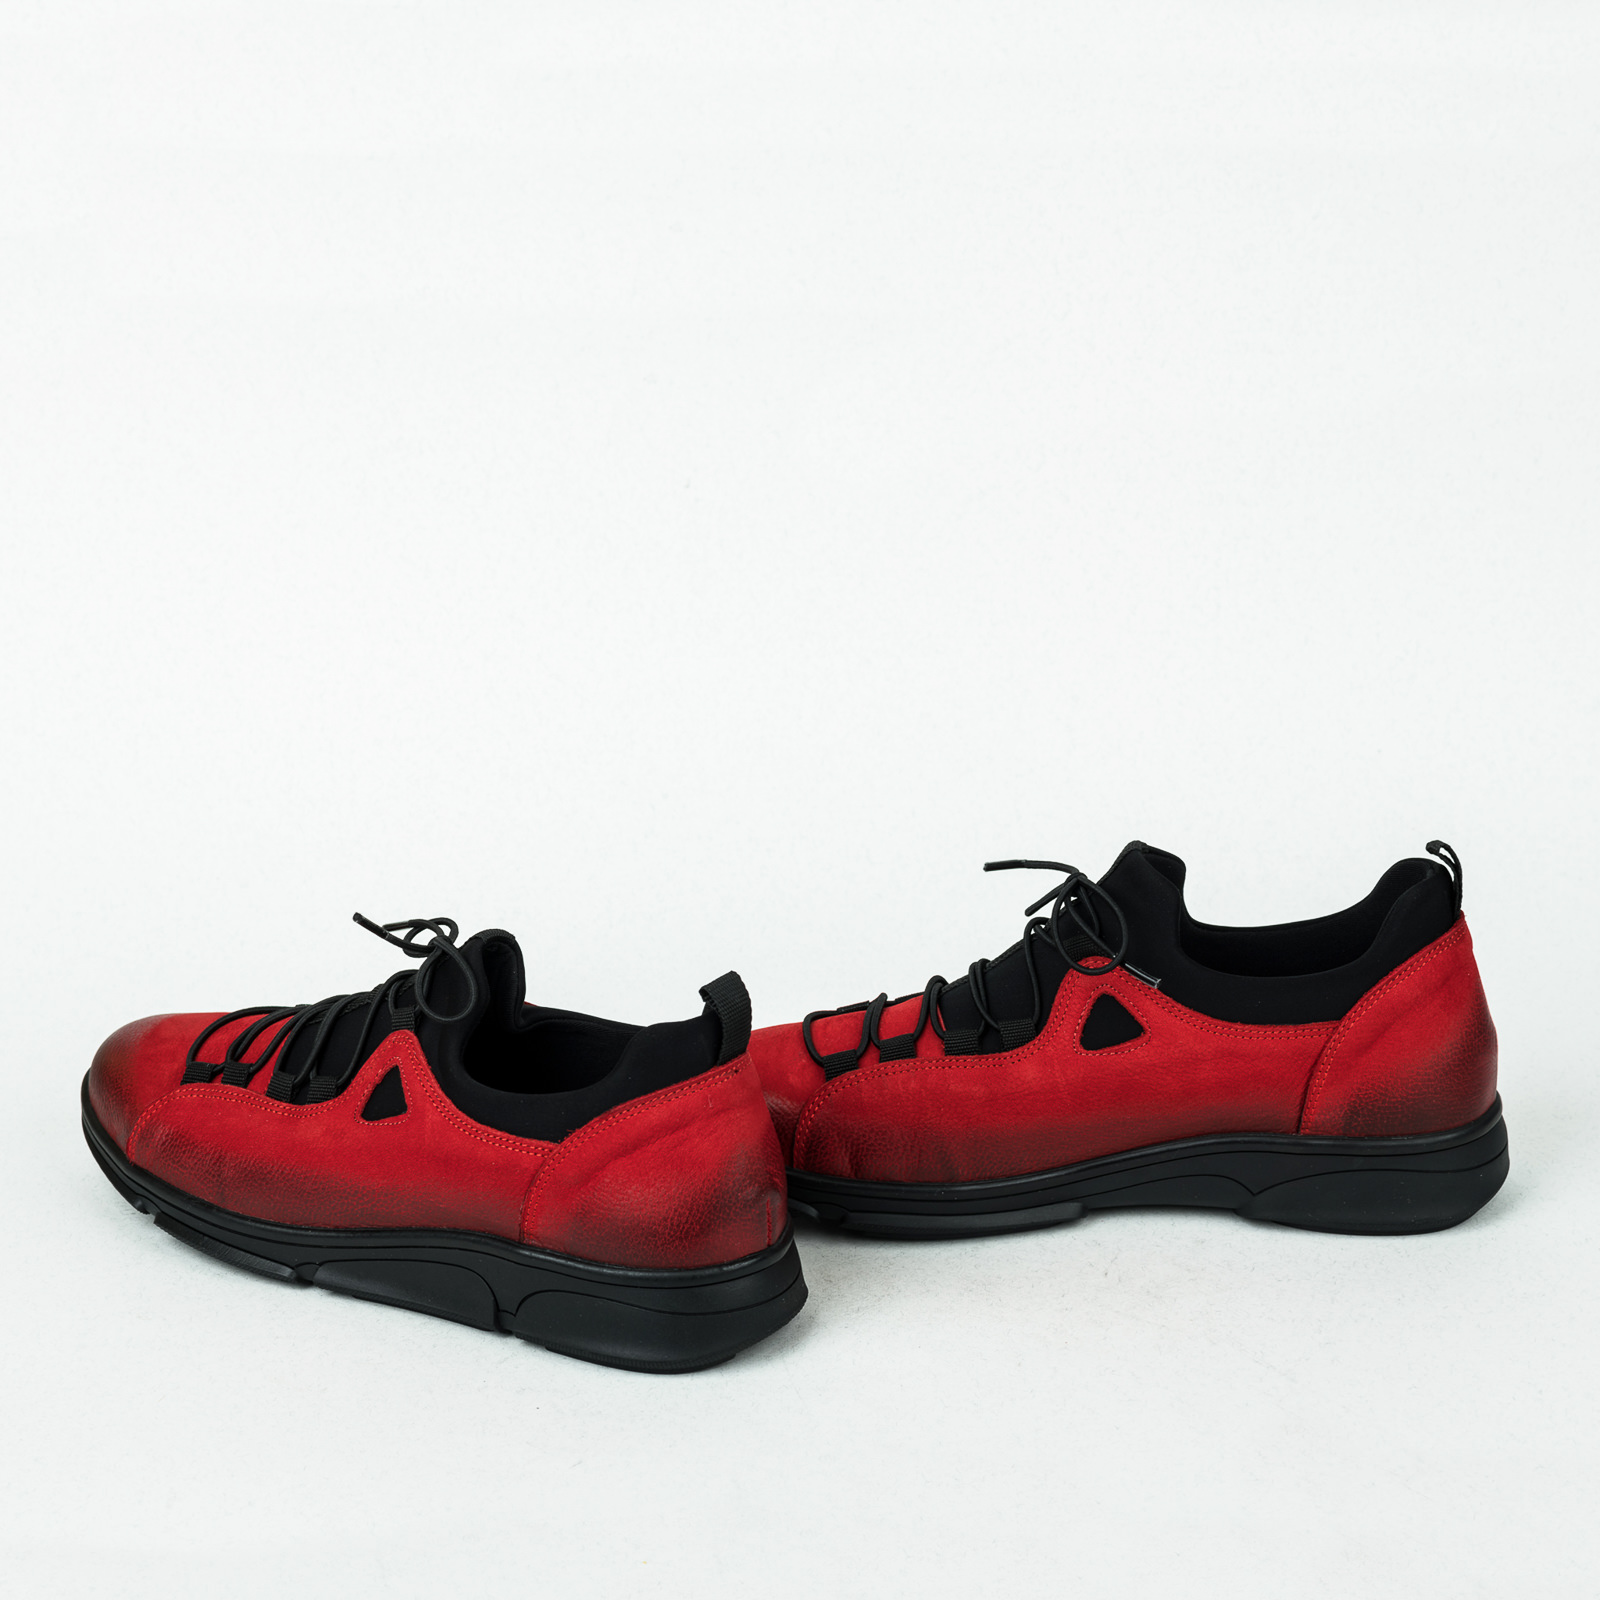 Leather shoes & flats B271 - RED